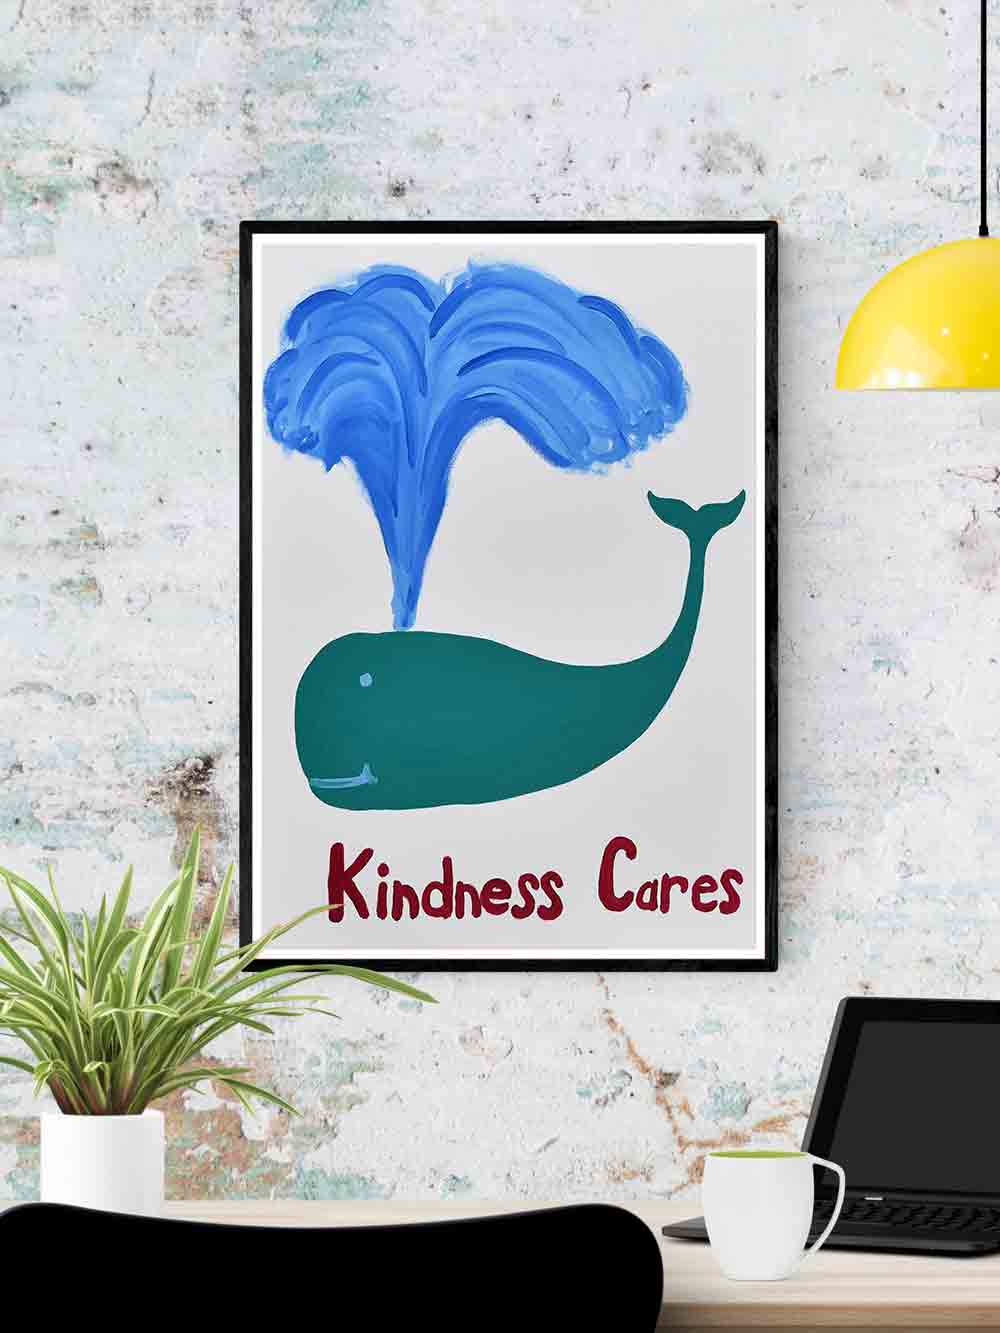 Kindness Cares Quirky Art Print in a frame on a wall